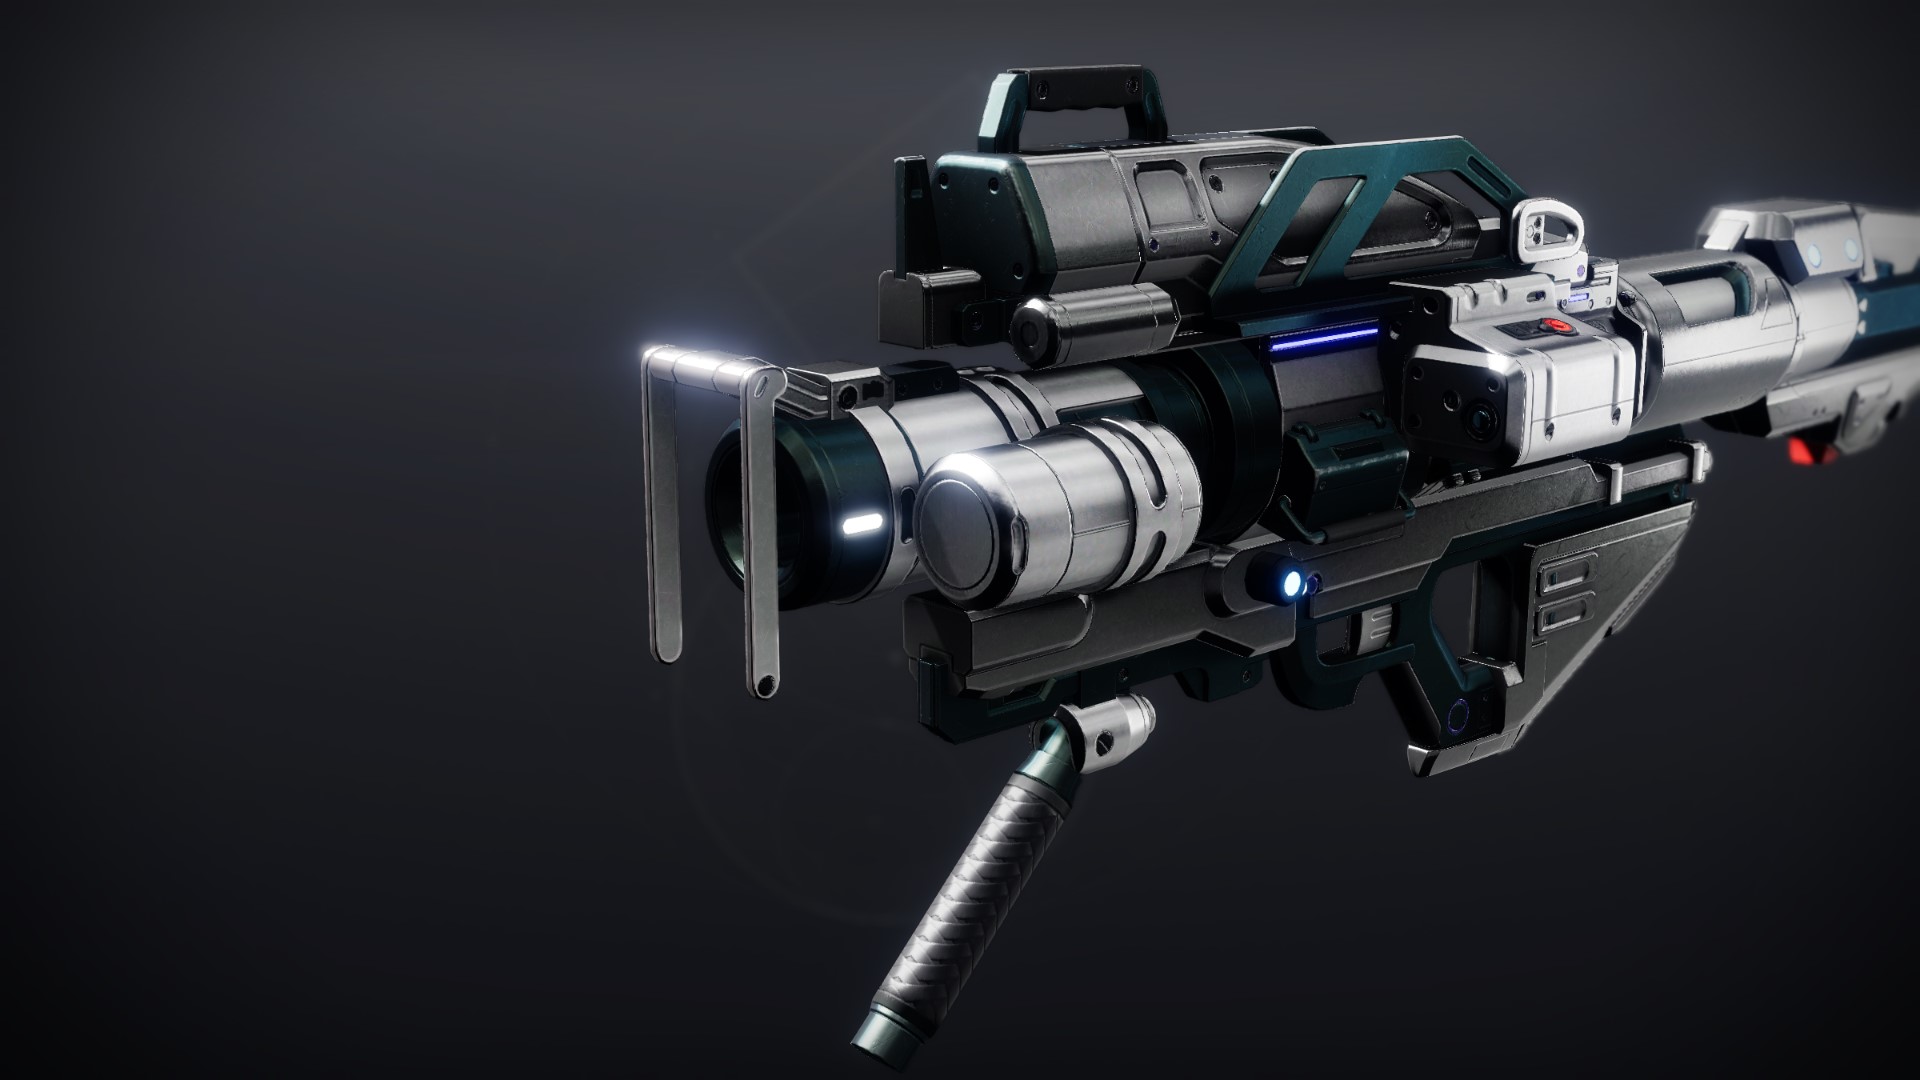 An in-game render of the Hezen Vengeance (Timelost).